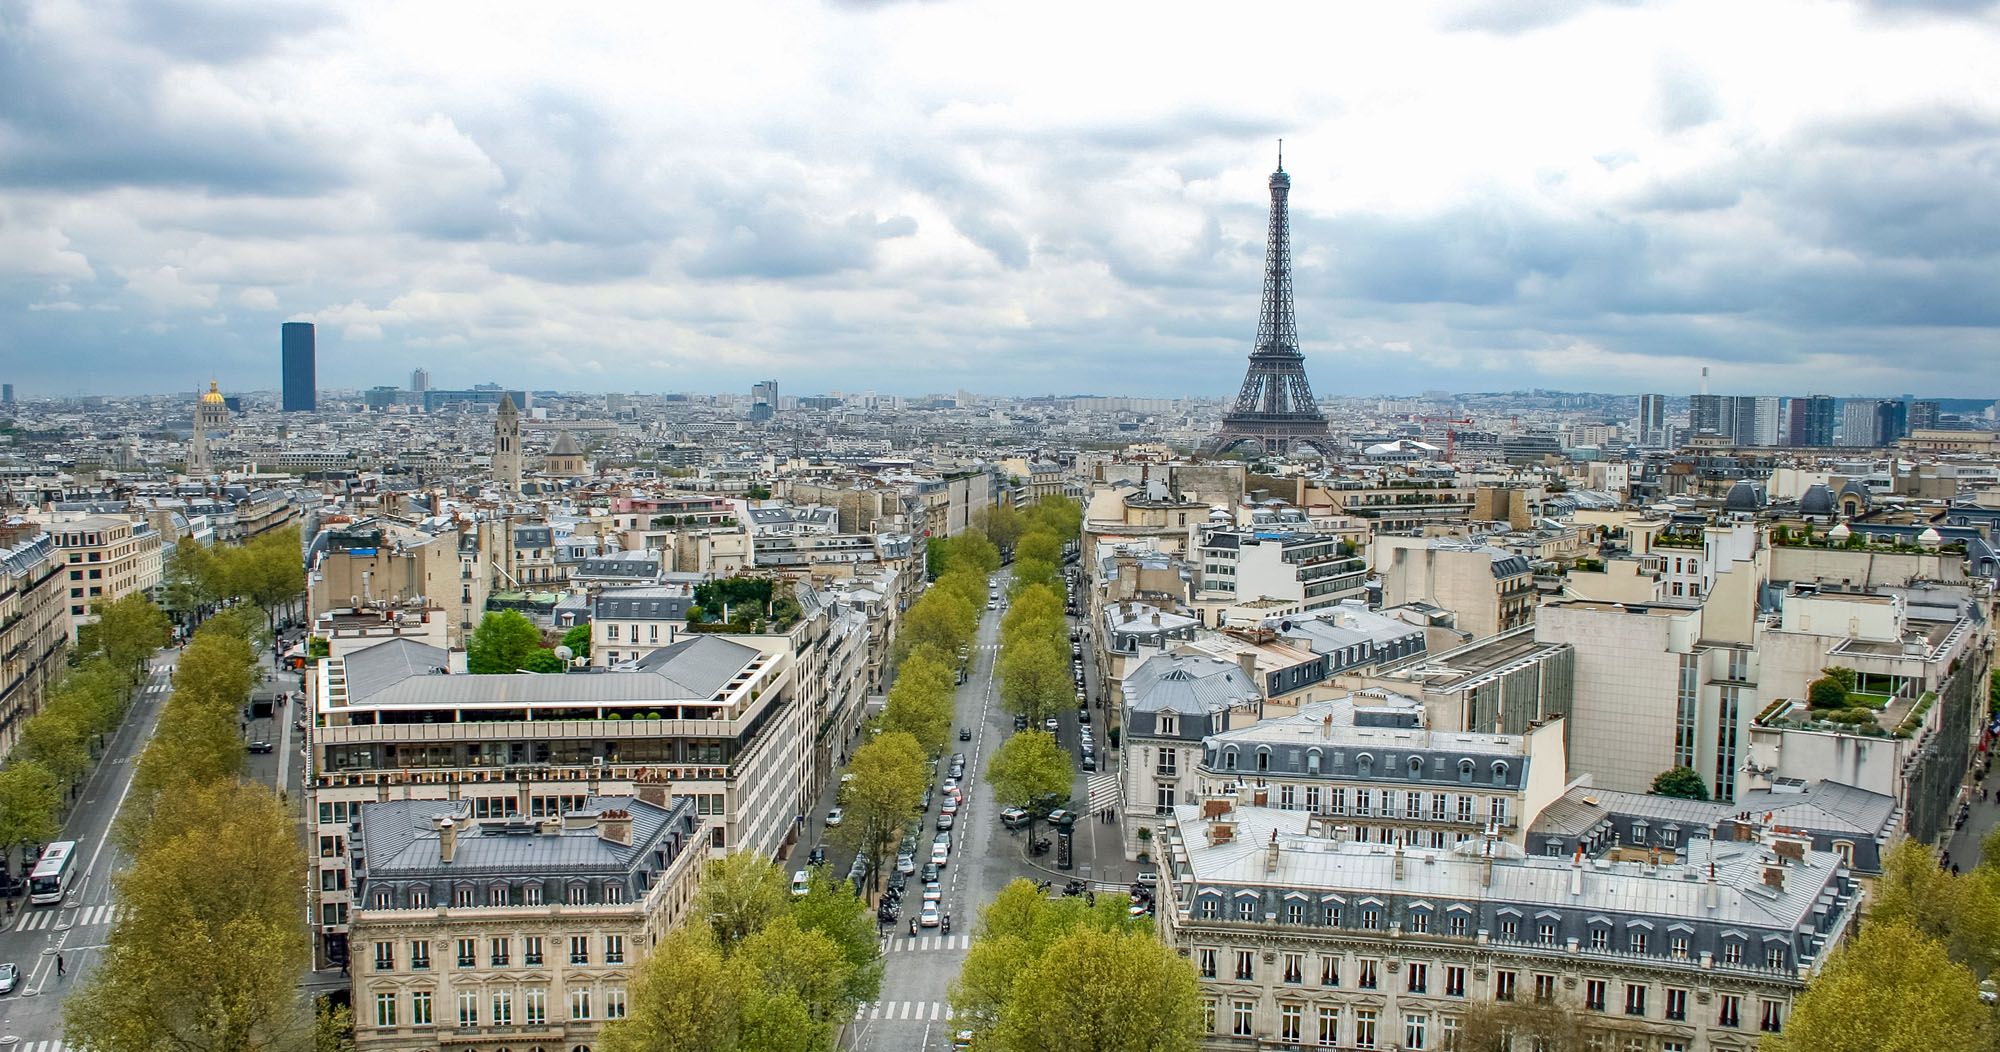 A view from a high vantage point of the Eiffel Tower with surrounding buildings and tree-lined streets leading up to it.